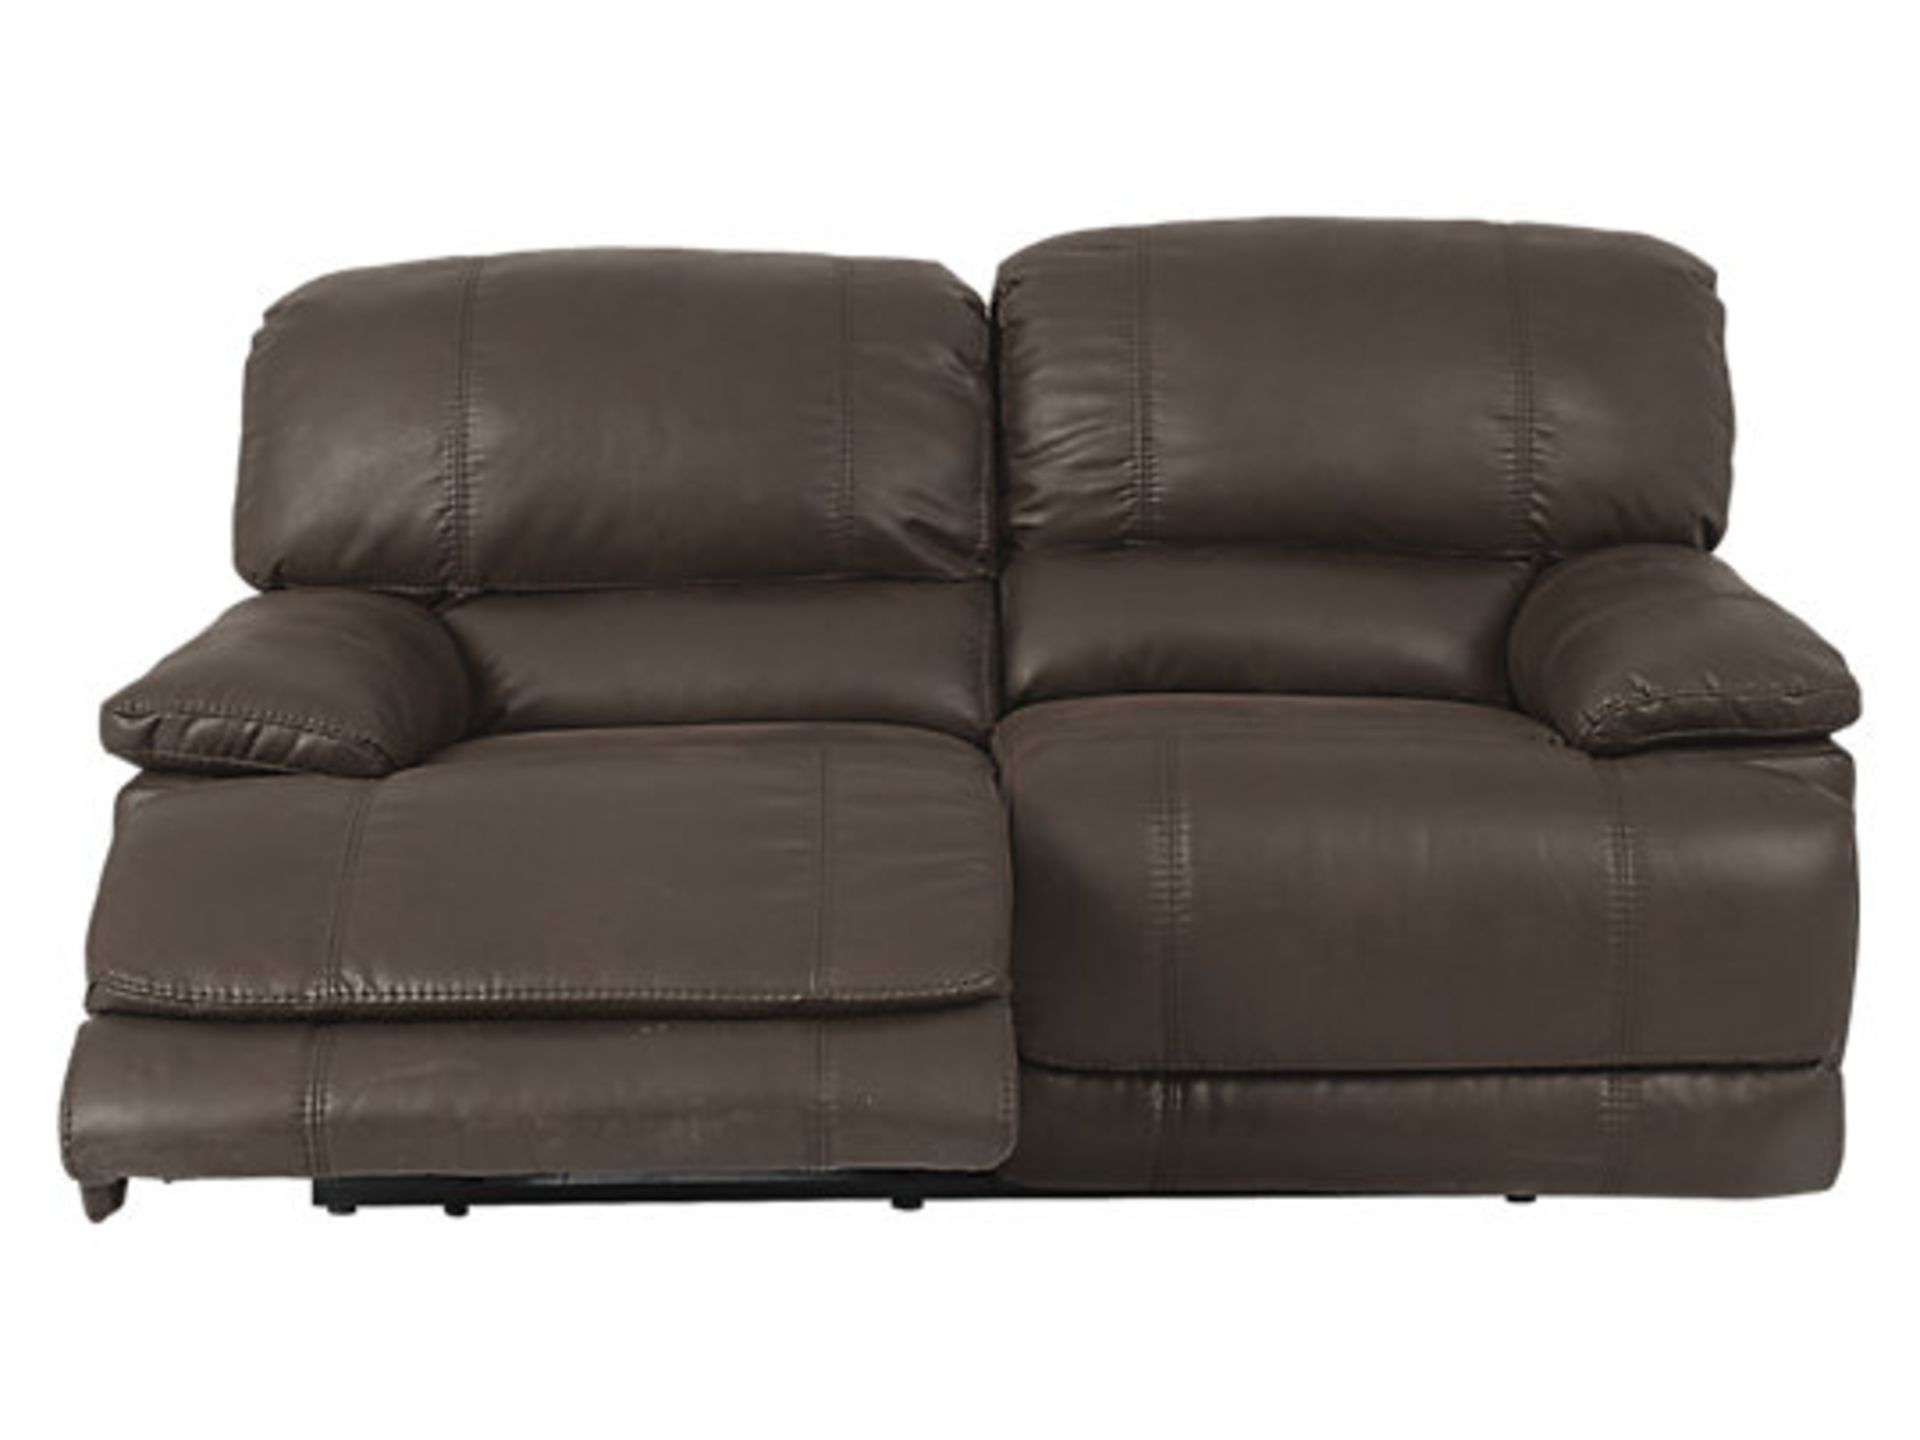 Boston expresso 2 seater brown leather air reclining sofa - Image 2 of 2